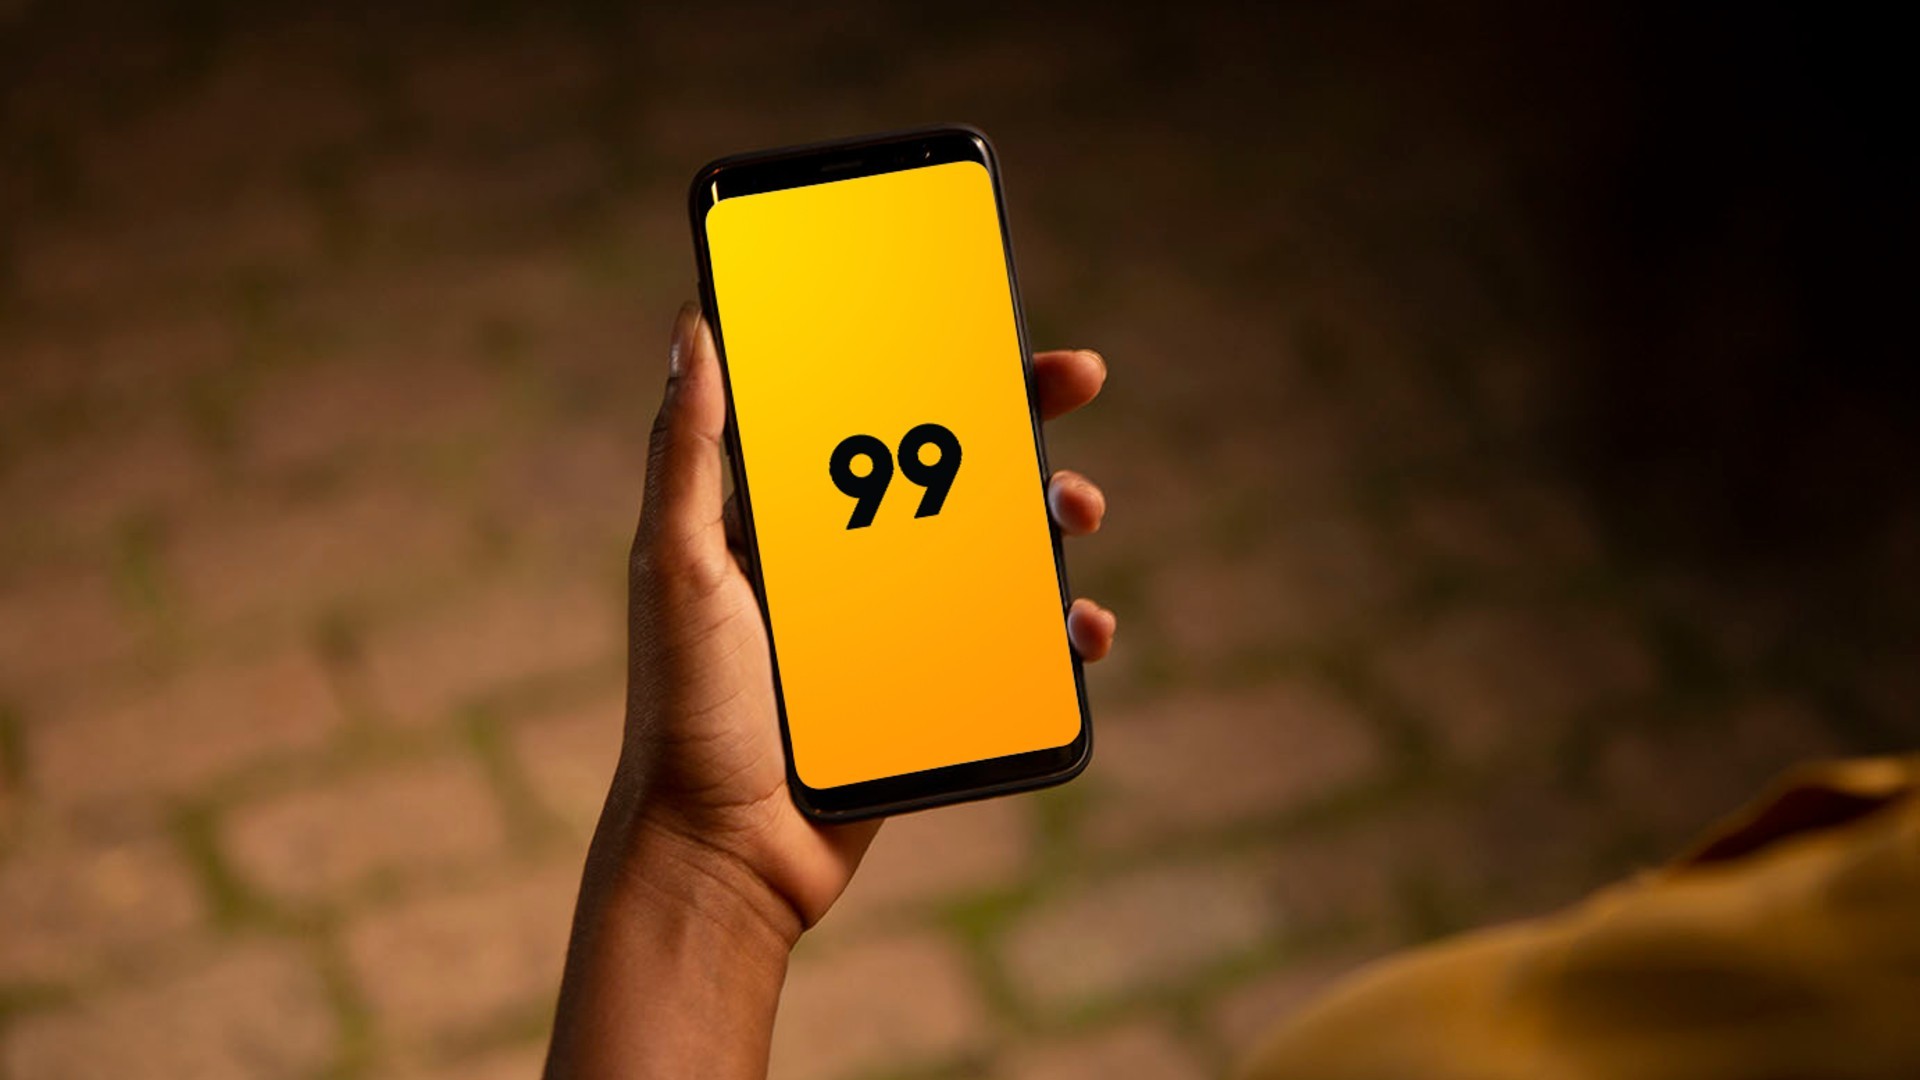 99 launches a patrol service with on-site assistance in cases of incidents during races